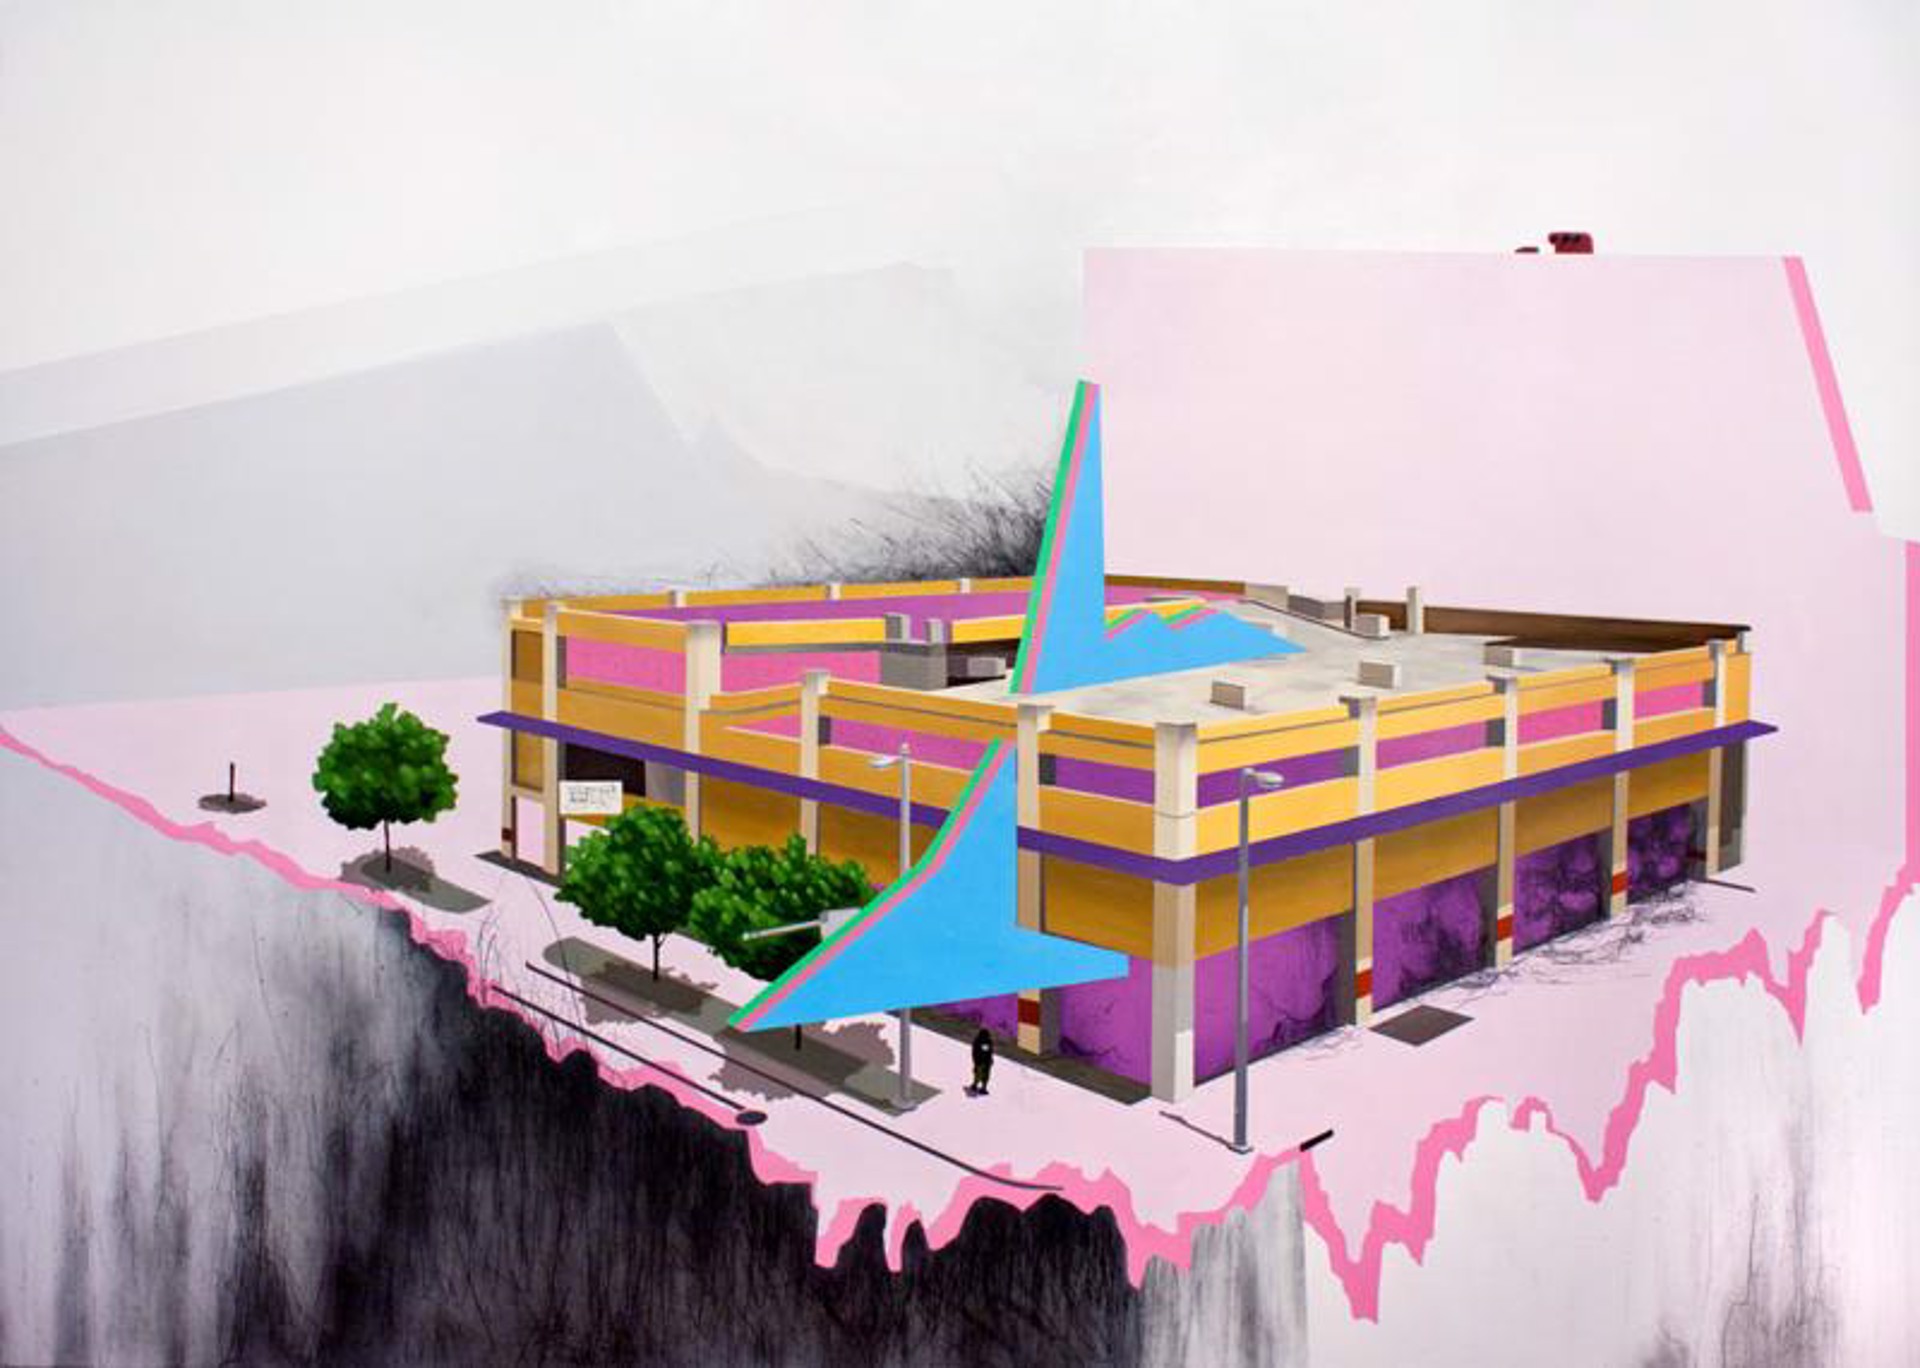 St. Helena Discotheque by Shayne Murphy